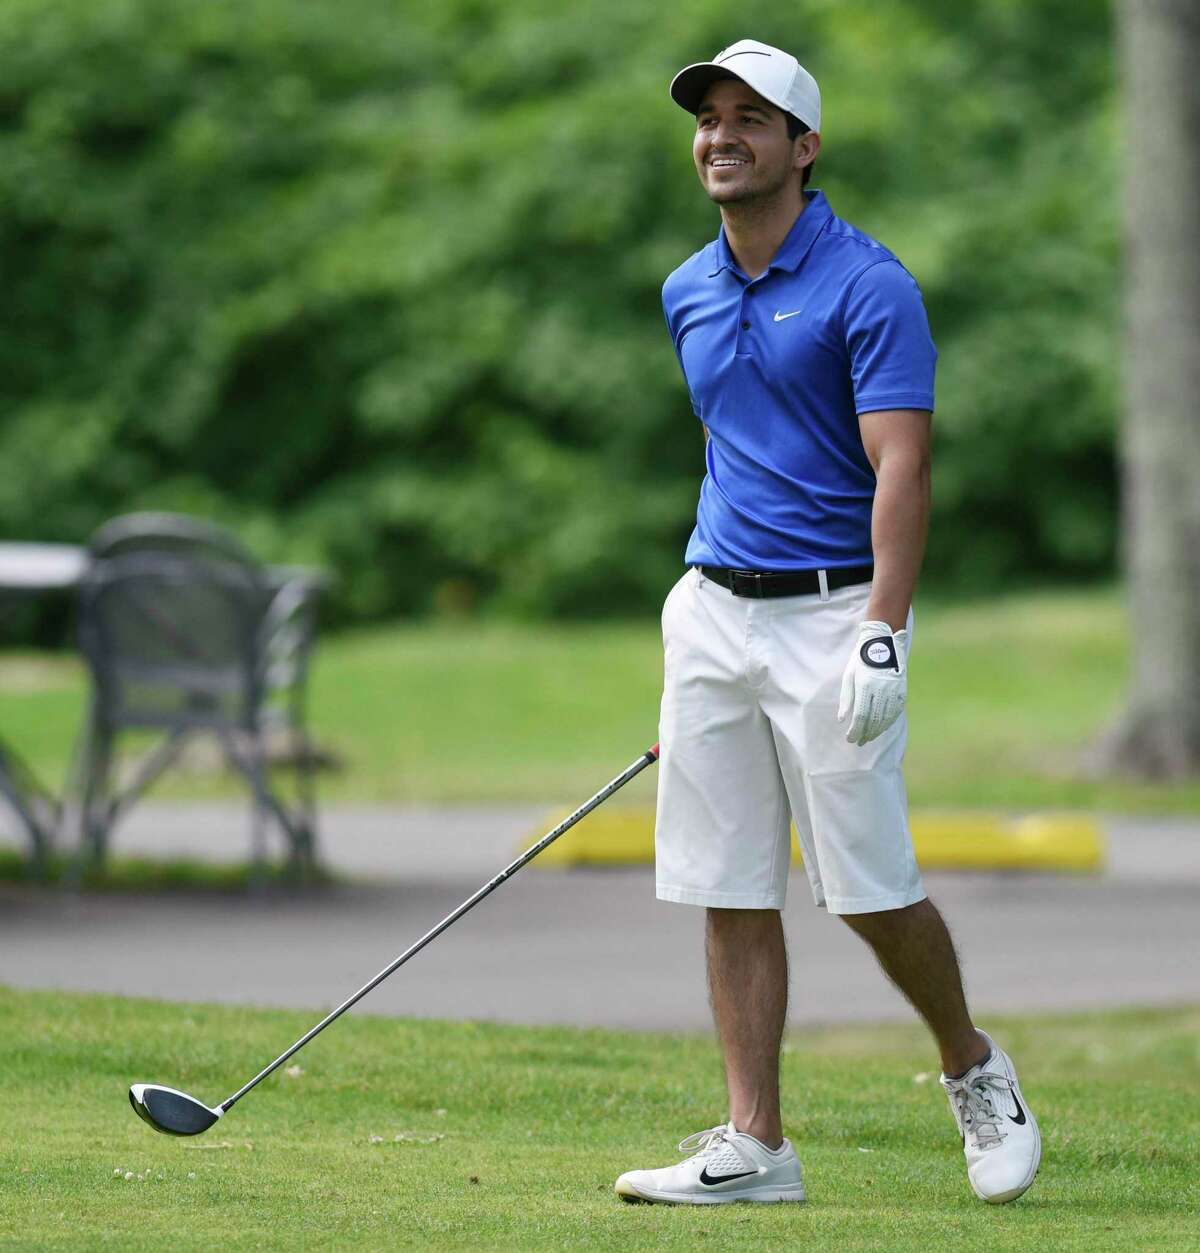 Jason Morilla plays in the 76th Annual Town Wide Men's Golf Tournament at Griffith E. Harris Golf Course in Greenwich, Conn. Sunday, June 27, 2021.